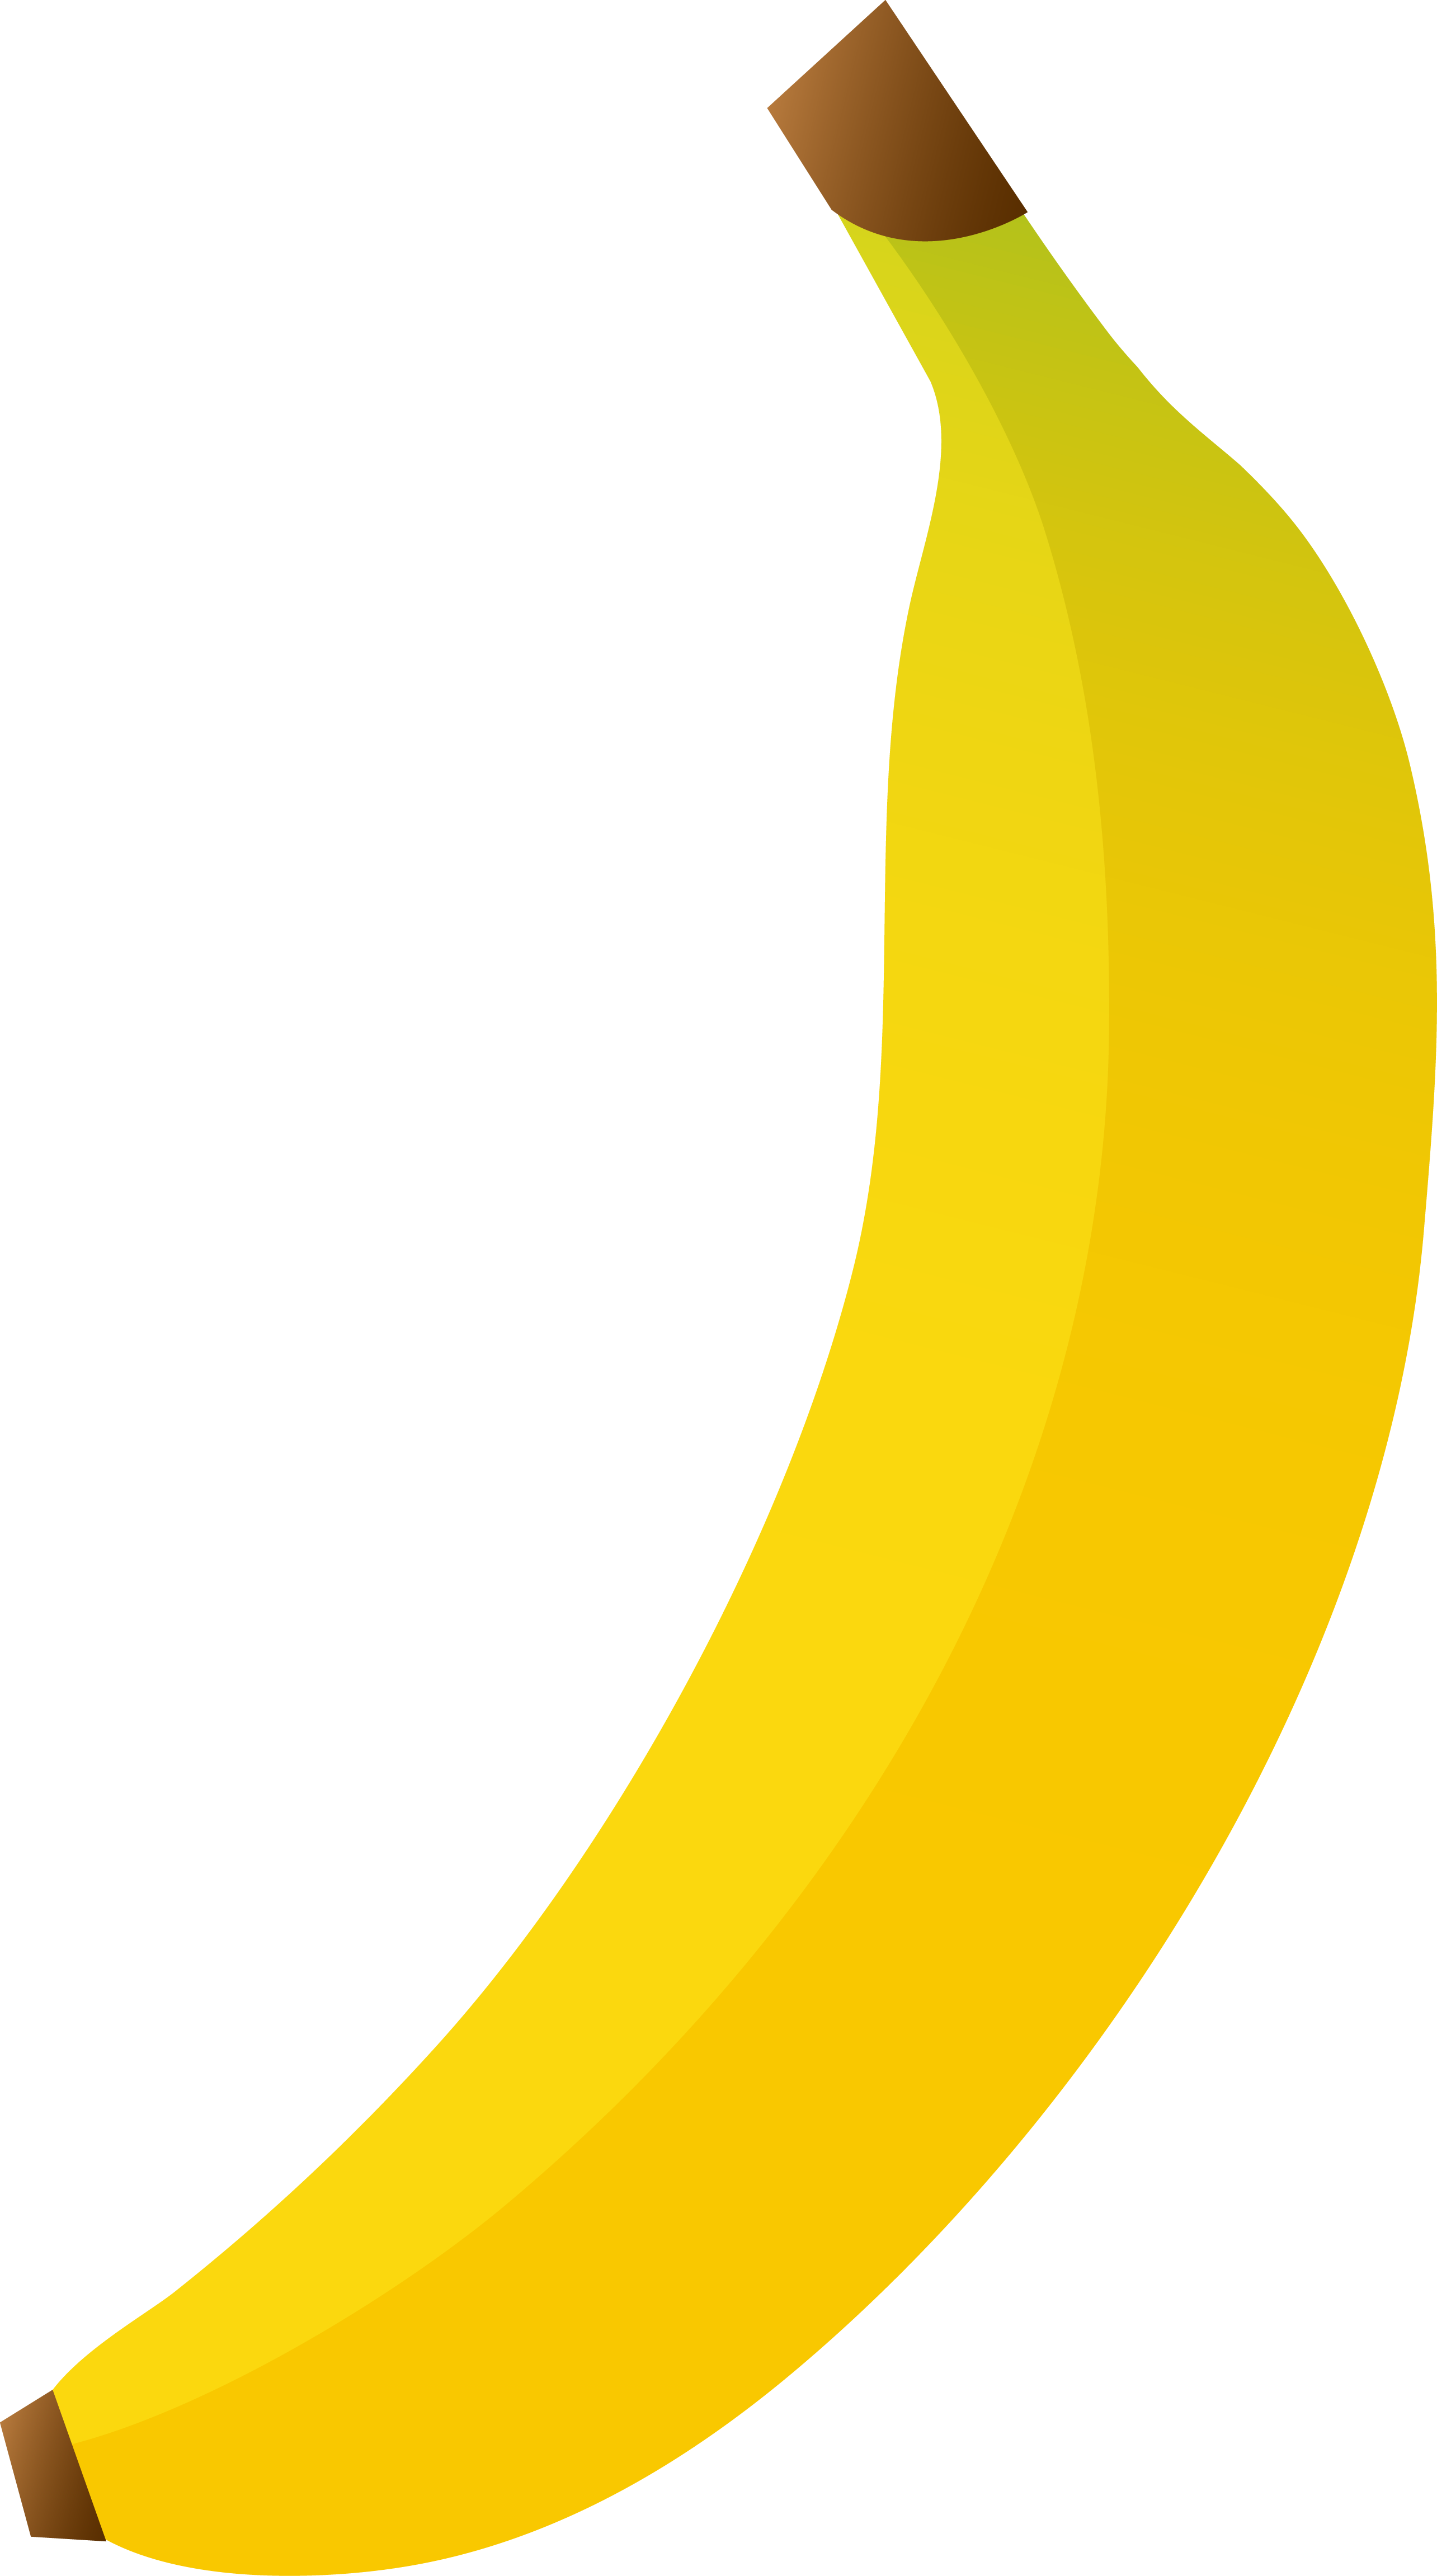 Free Banana Pictures Cartoon, Download Free Banana Pictures Cartoon png